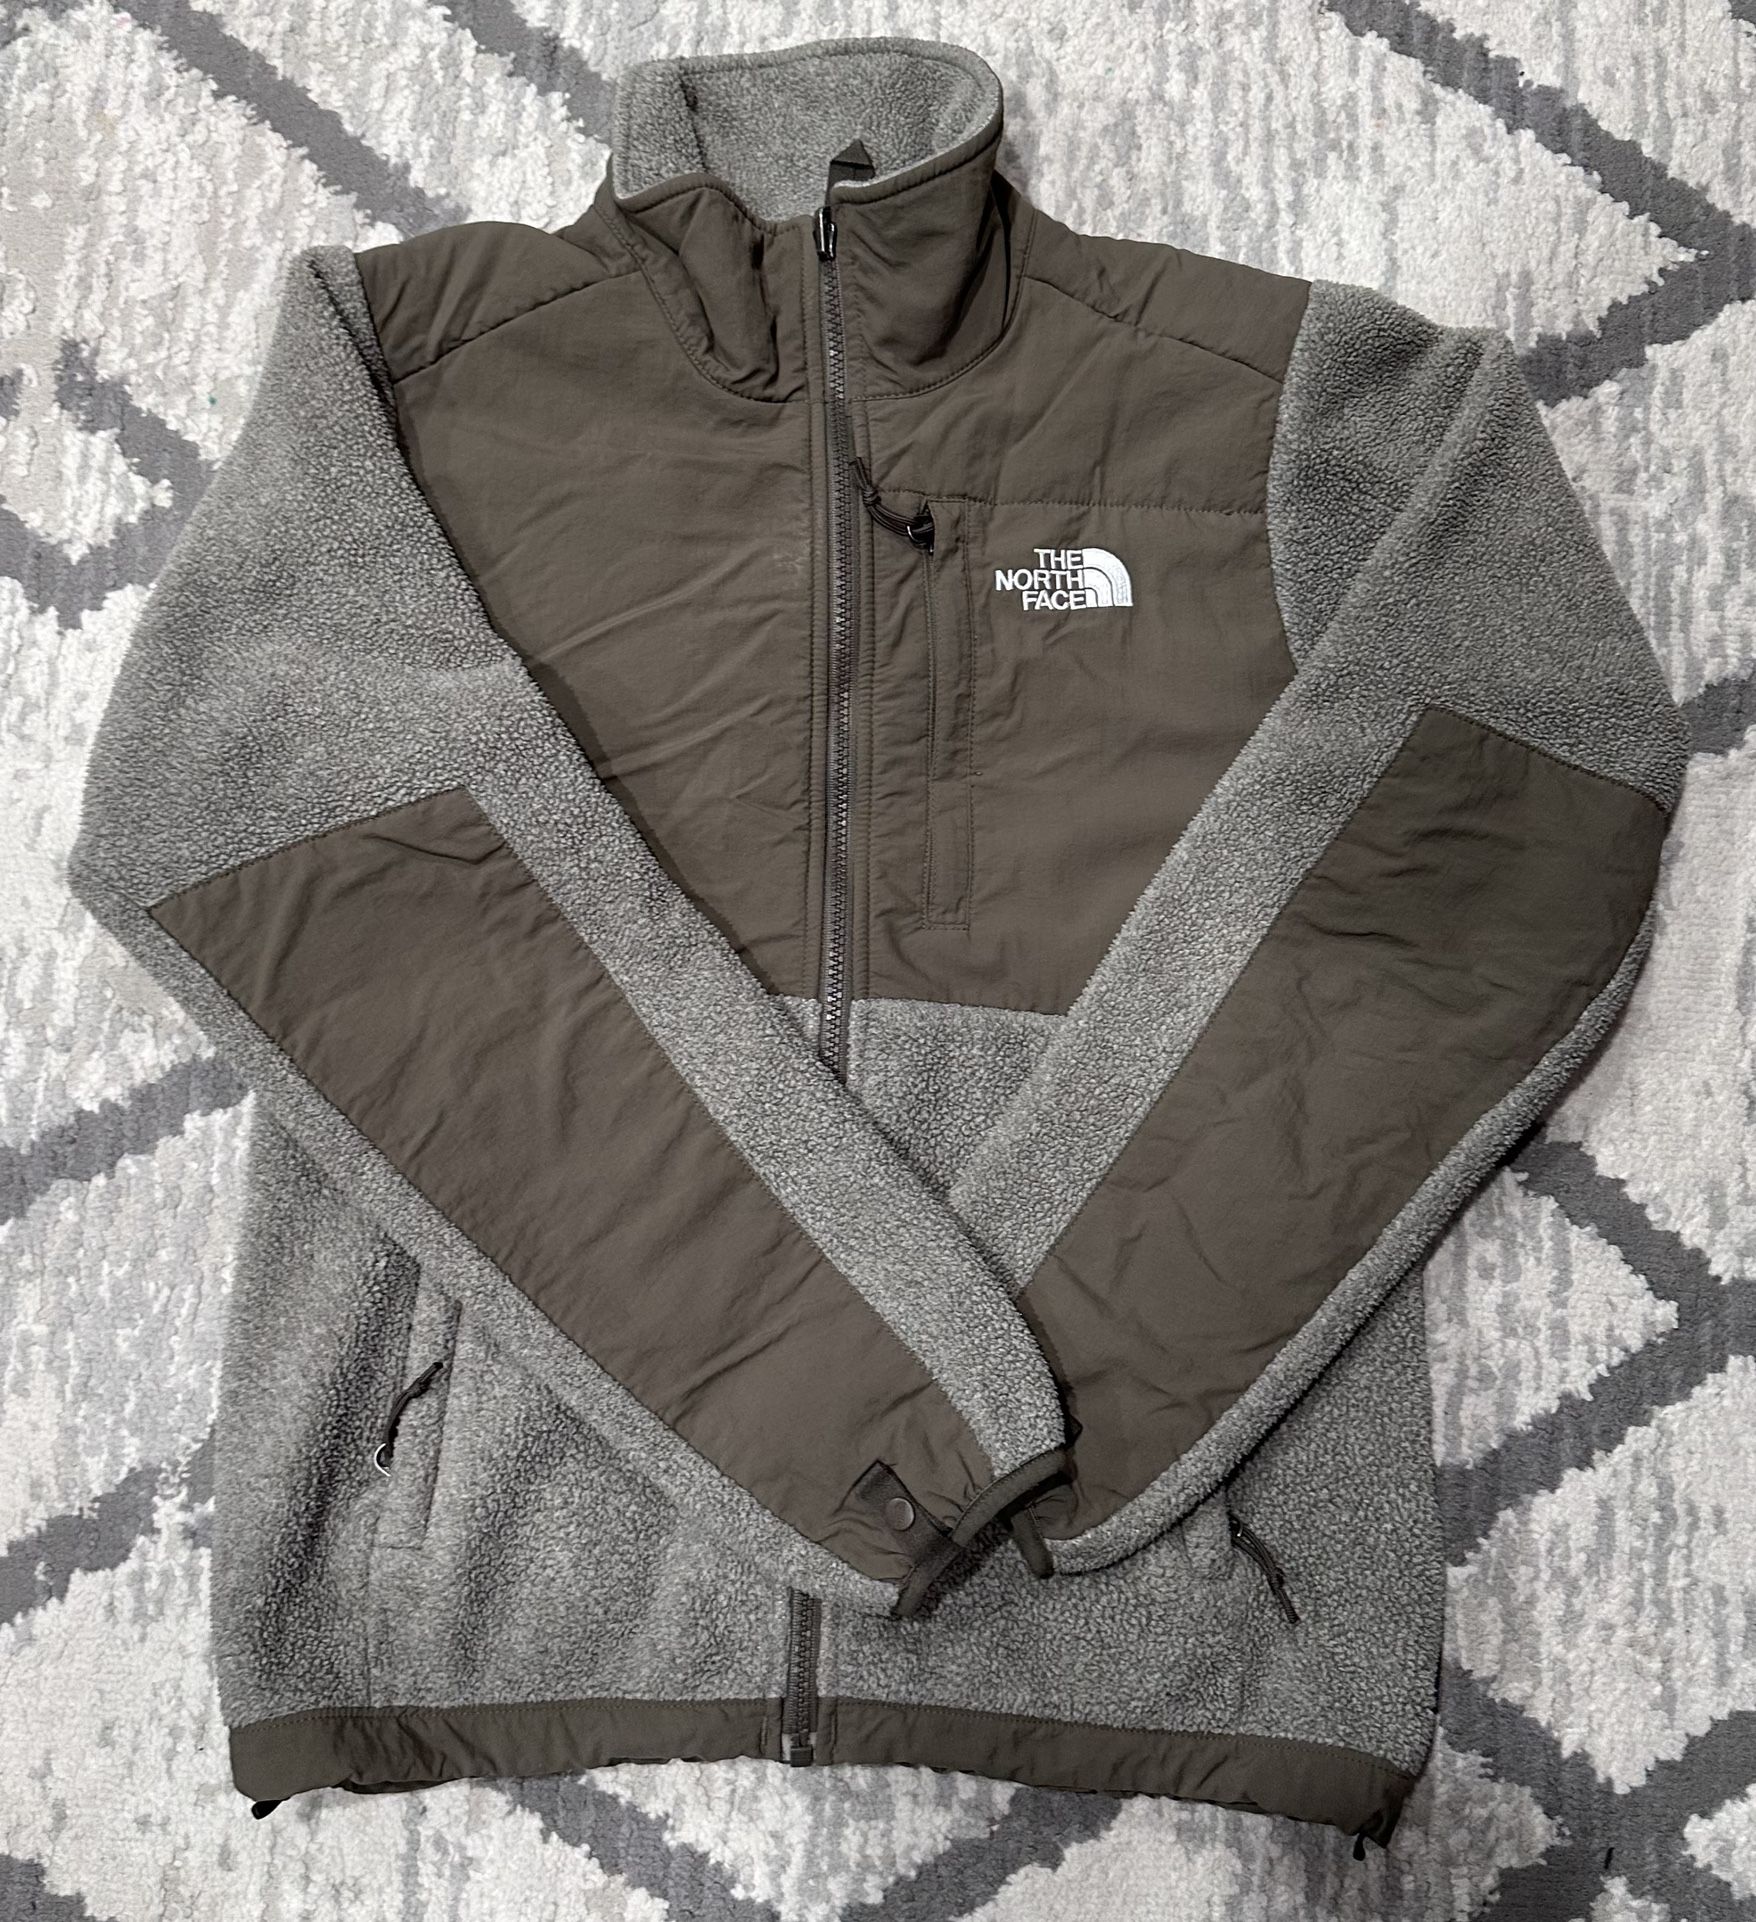 The North Face Women’s Jacket Size XS